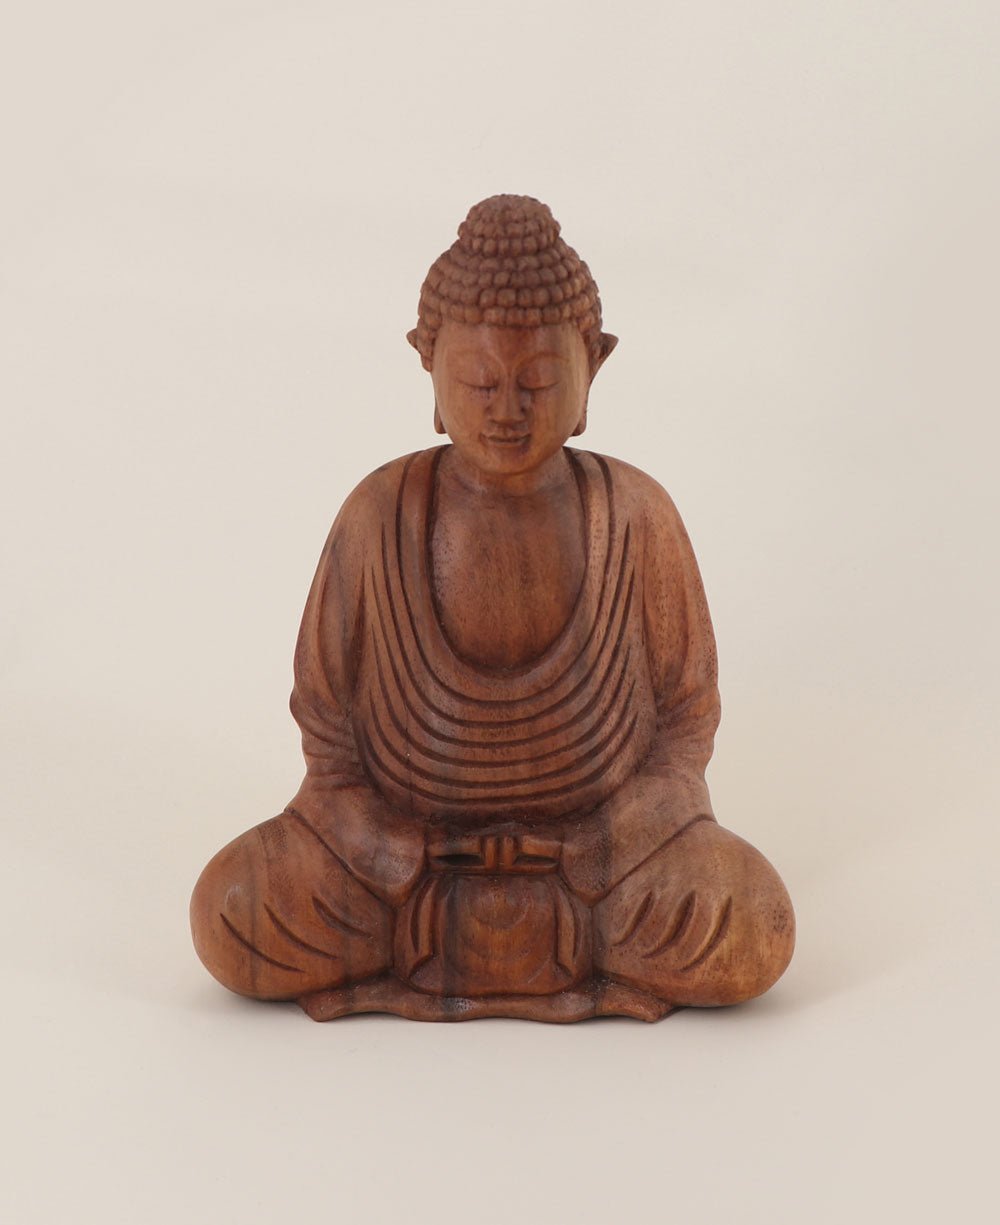 Hand Carved Wood Sitting Buddha Statue From Bali - Sculptures & Statues